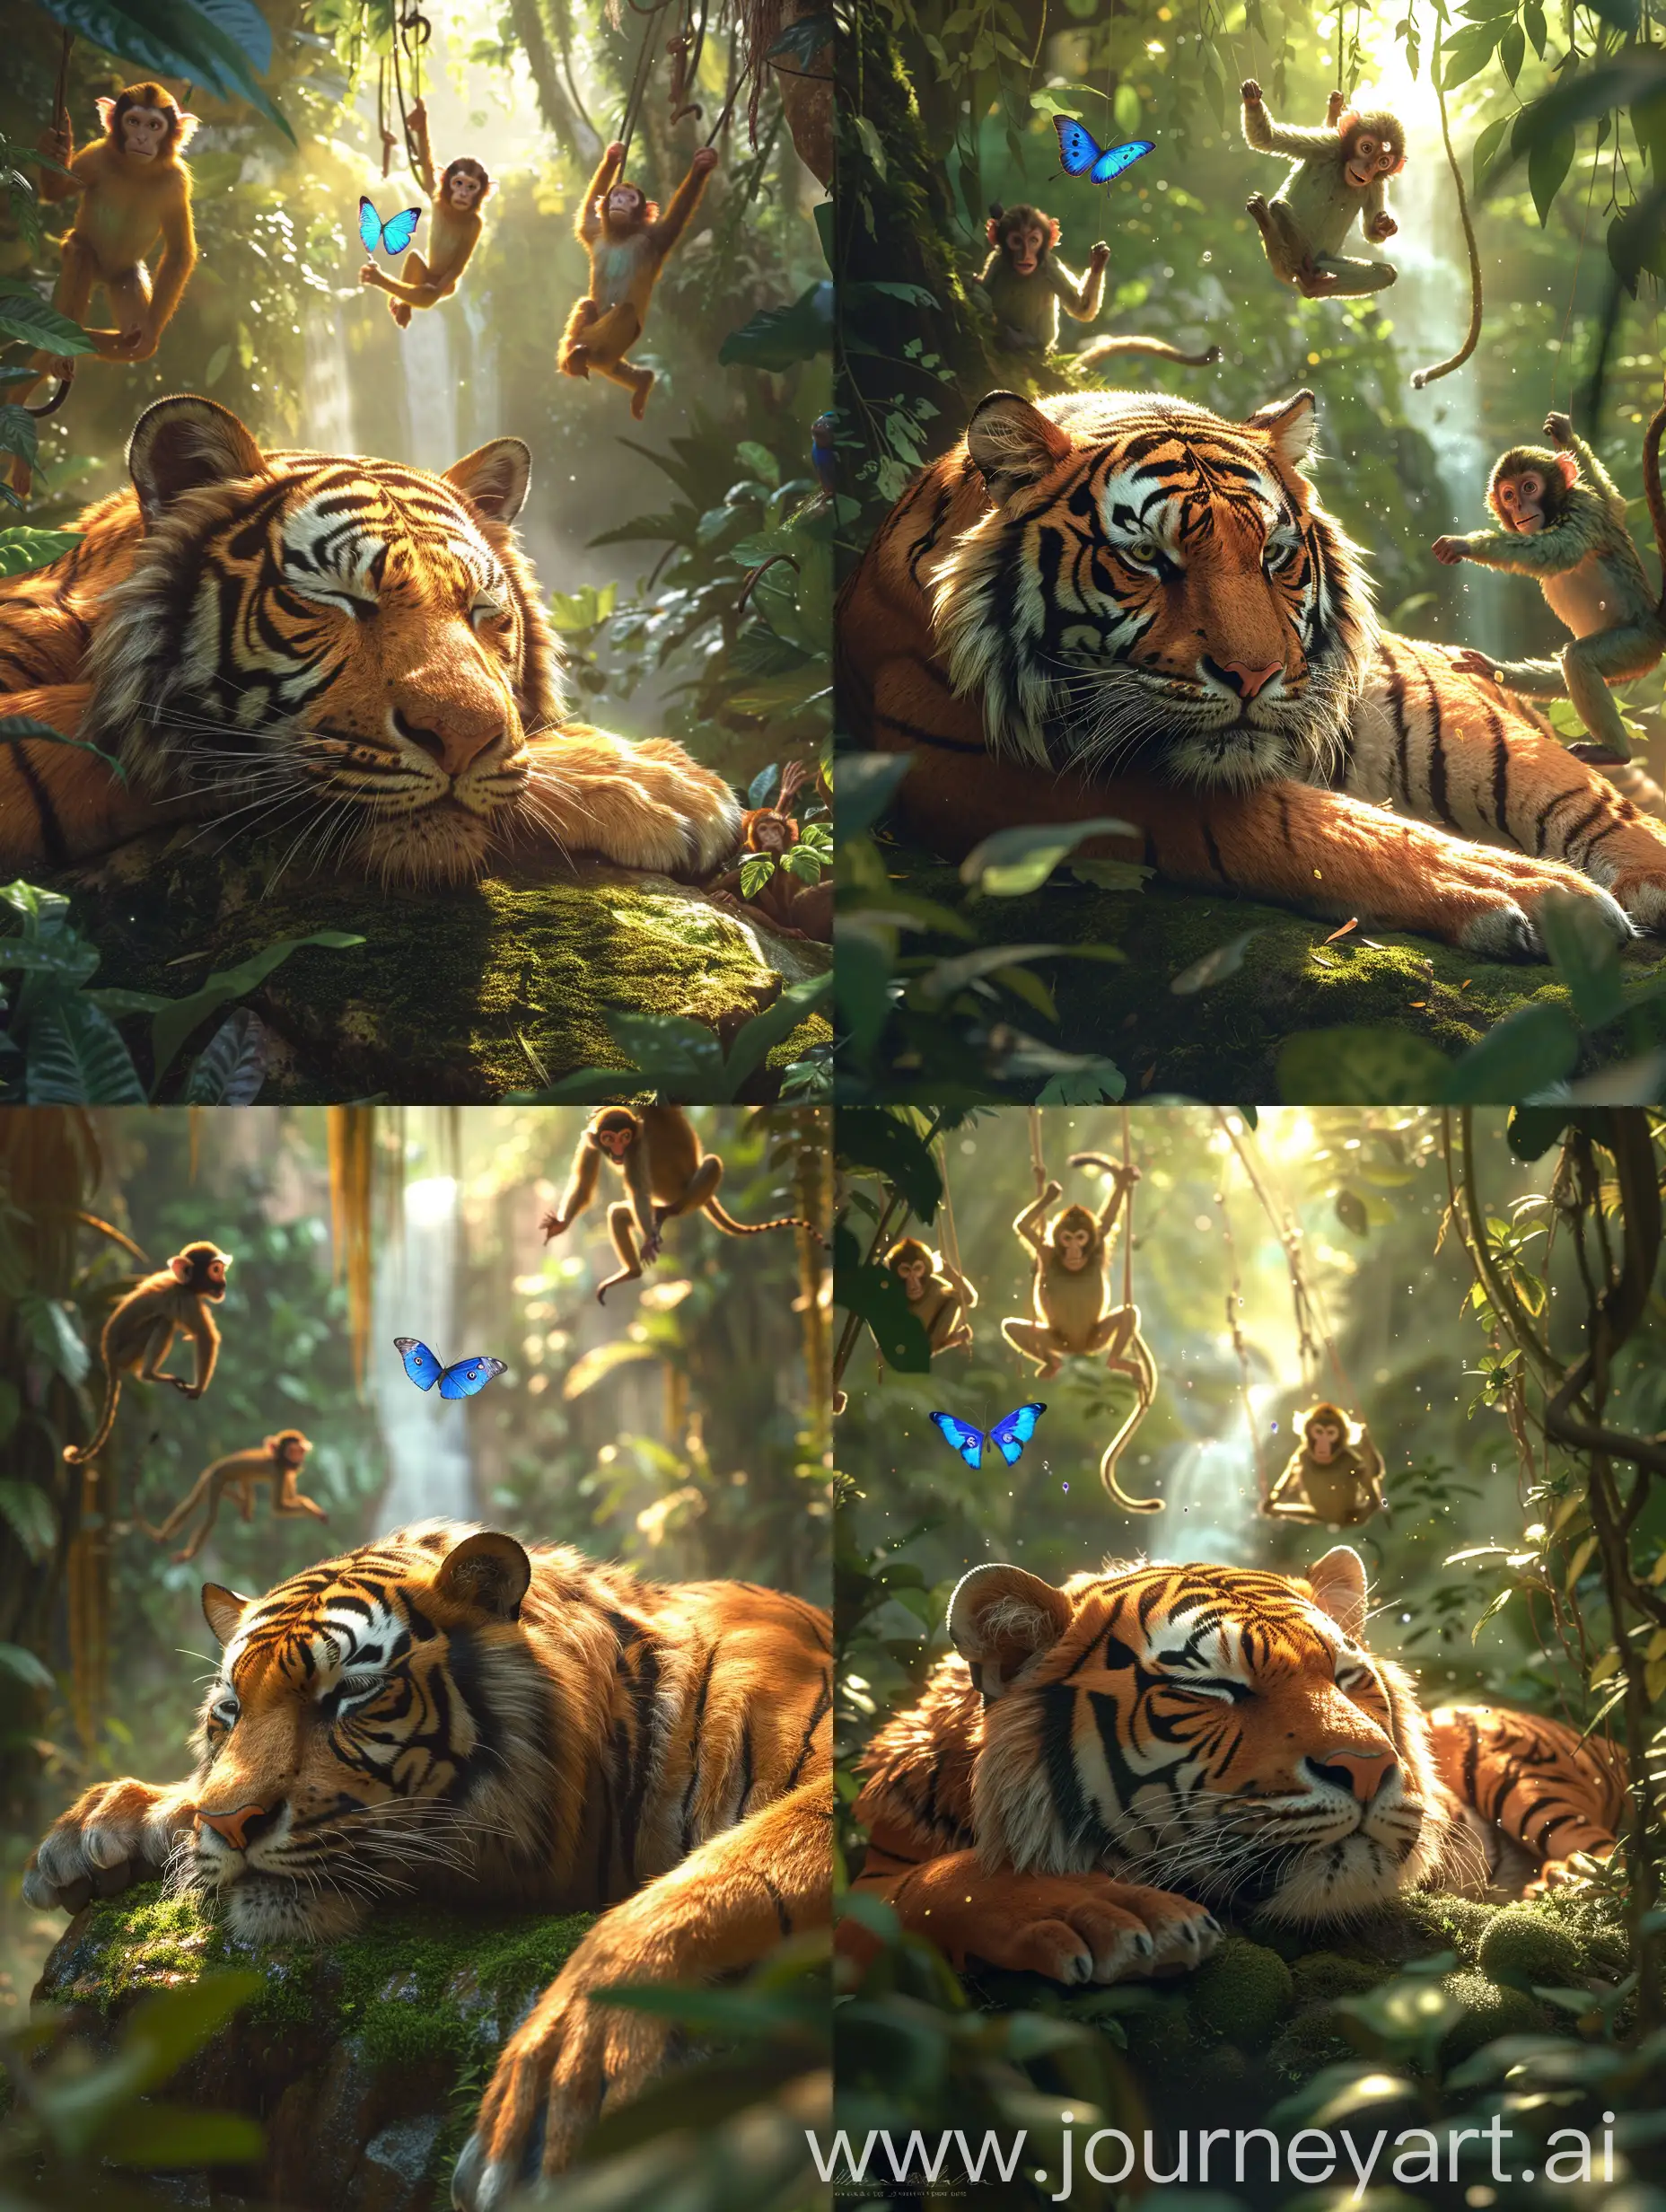 Majestic-Tiger-Resting-Amidst-Playful-Monkeys-in-a-Vibrant-Rainforest